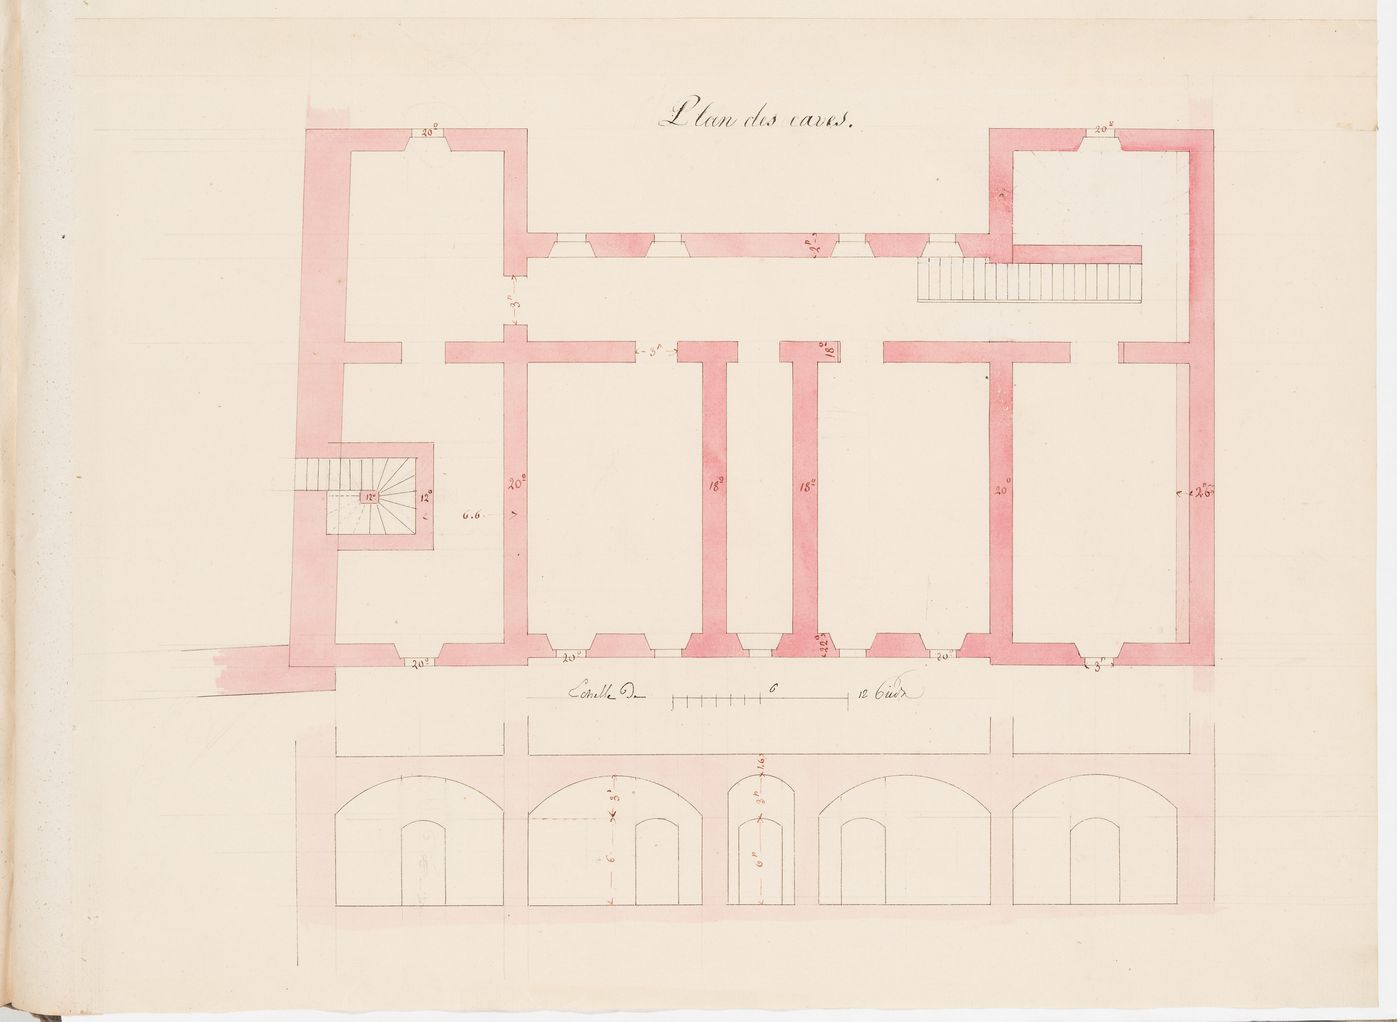 Plan and section for the "caves" of a "guinguette"